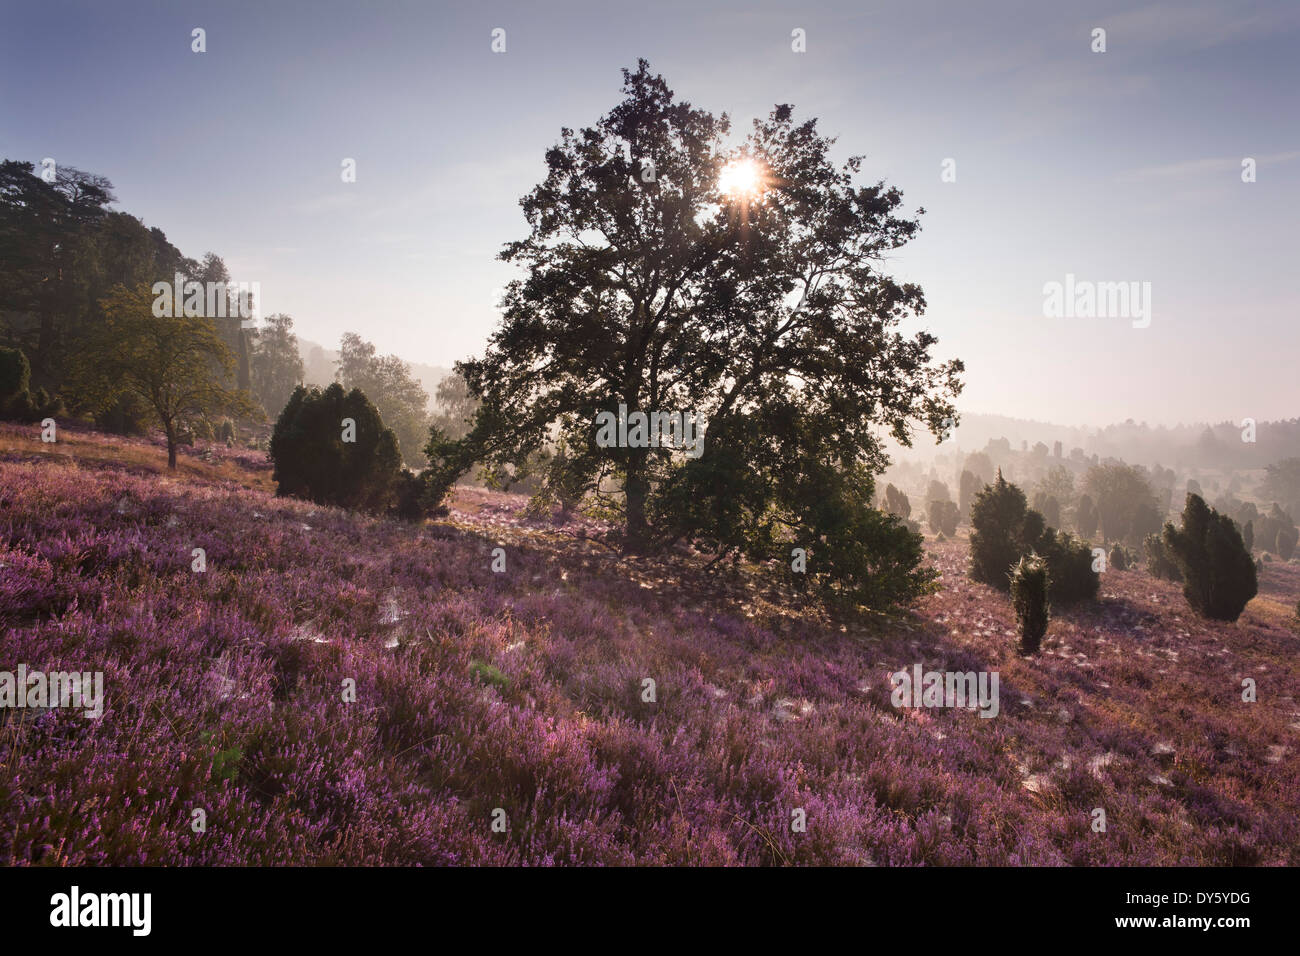 Oak and blooming heather in the morning mist, Totengrund, Lueneburg Heath, Lower Saxony, Germany, Europe Stock Photo